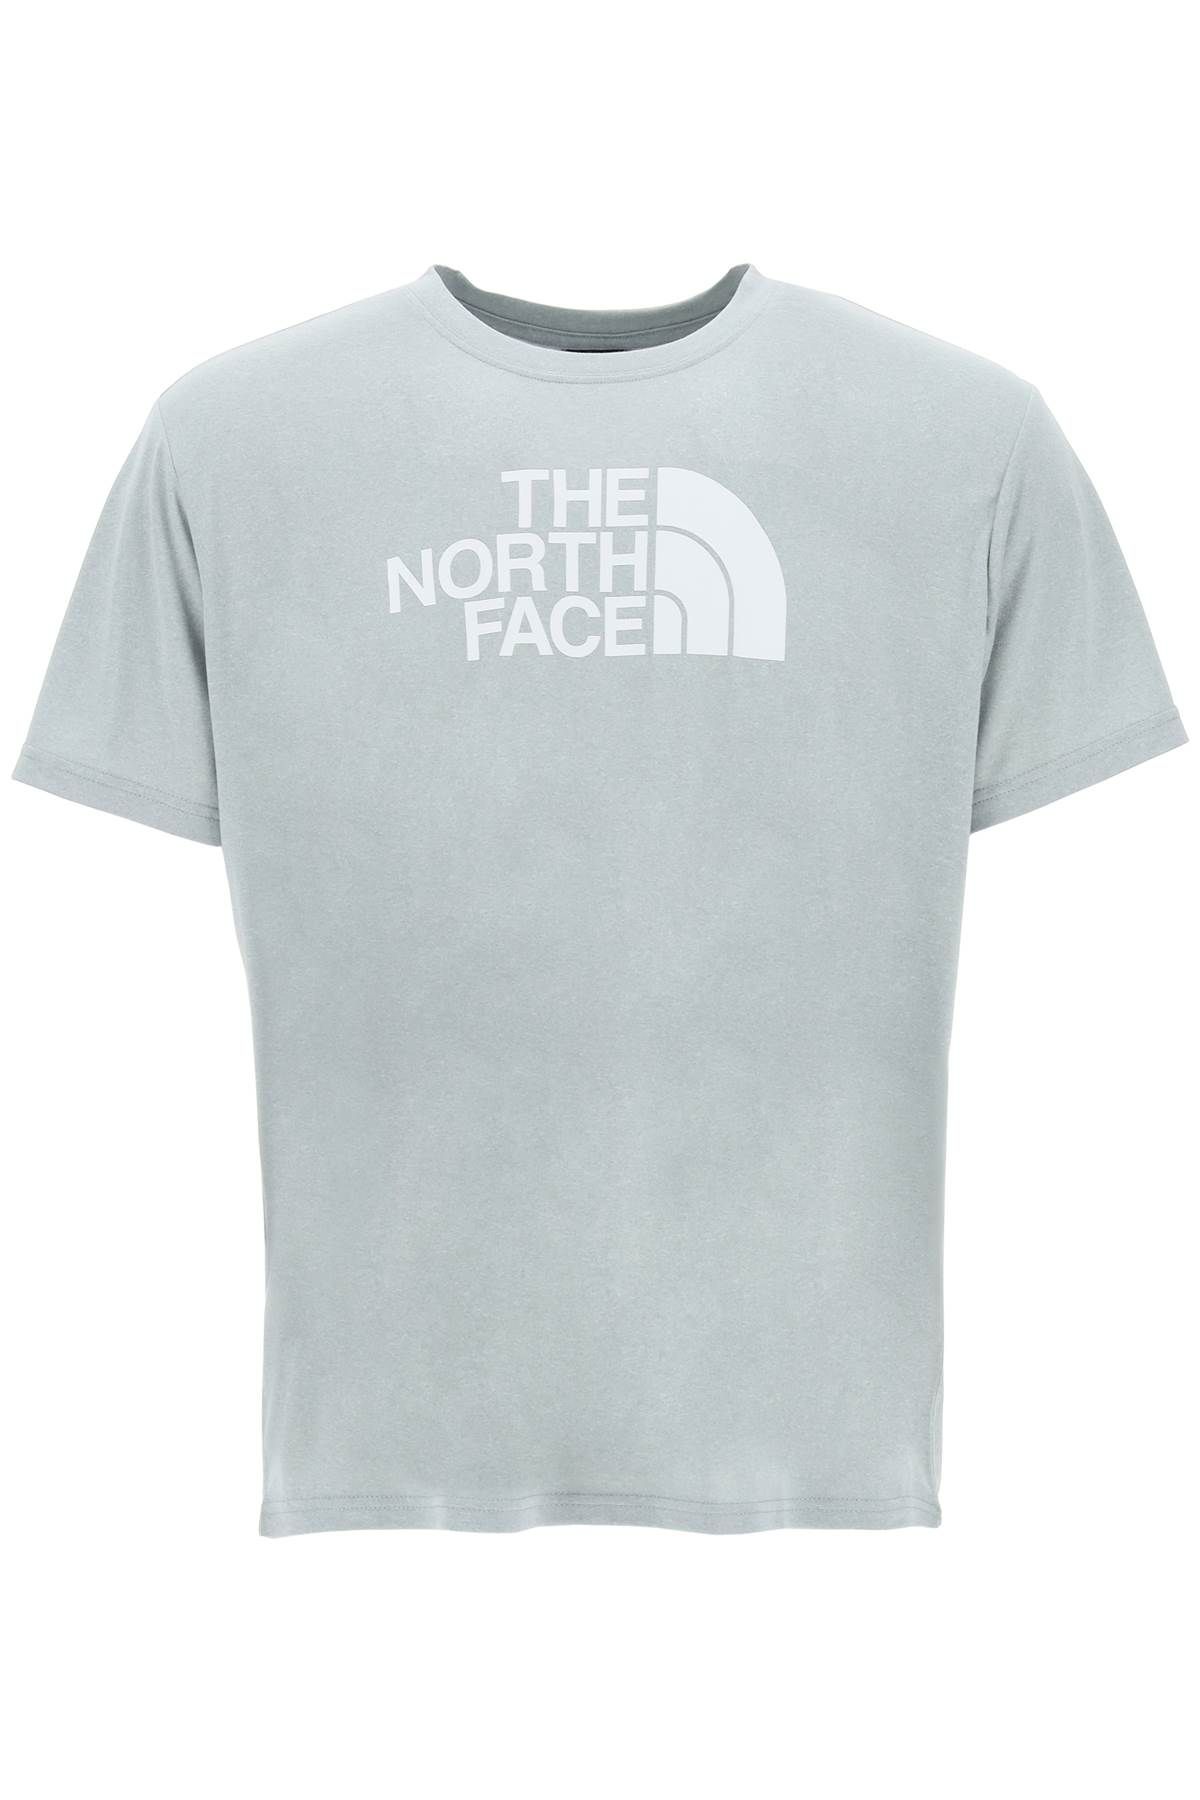 Shop The North Face Care  Easy Care Reax In Grey